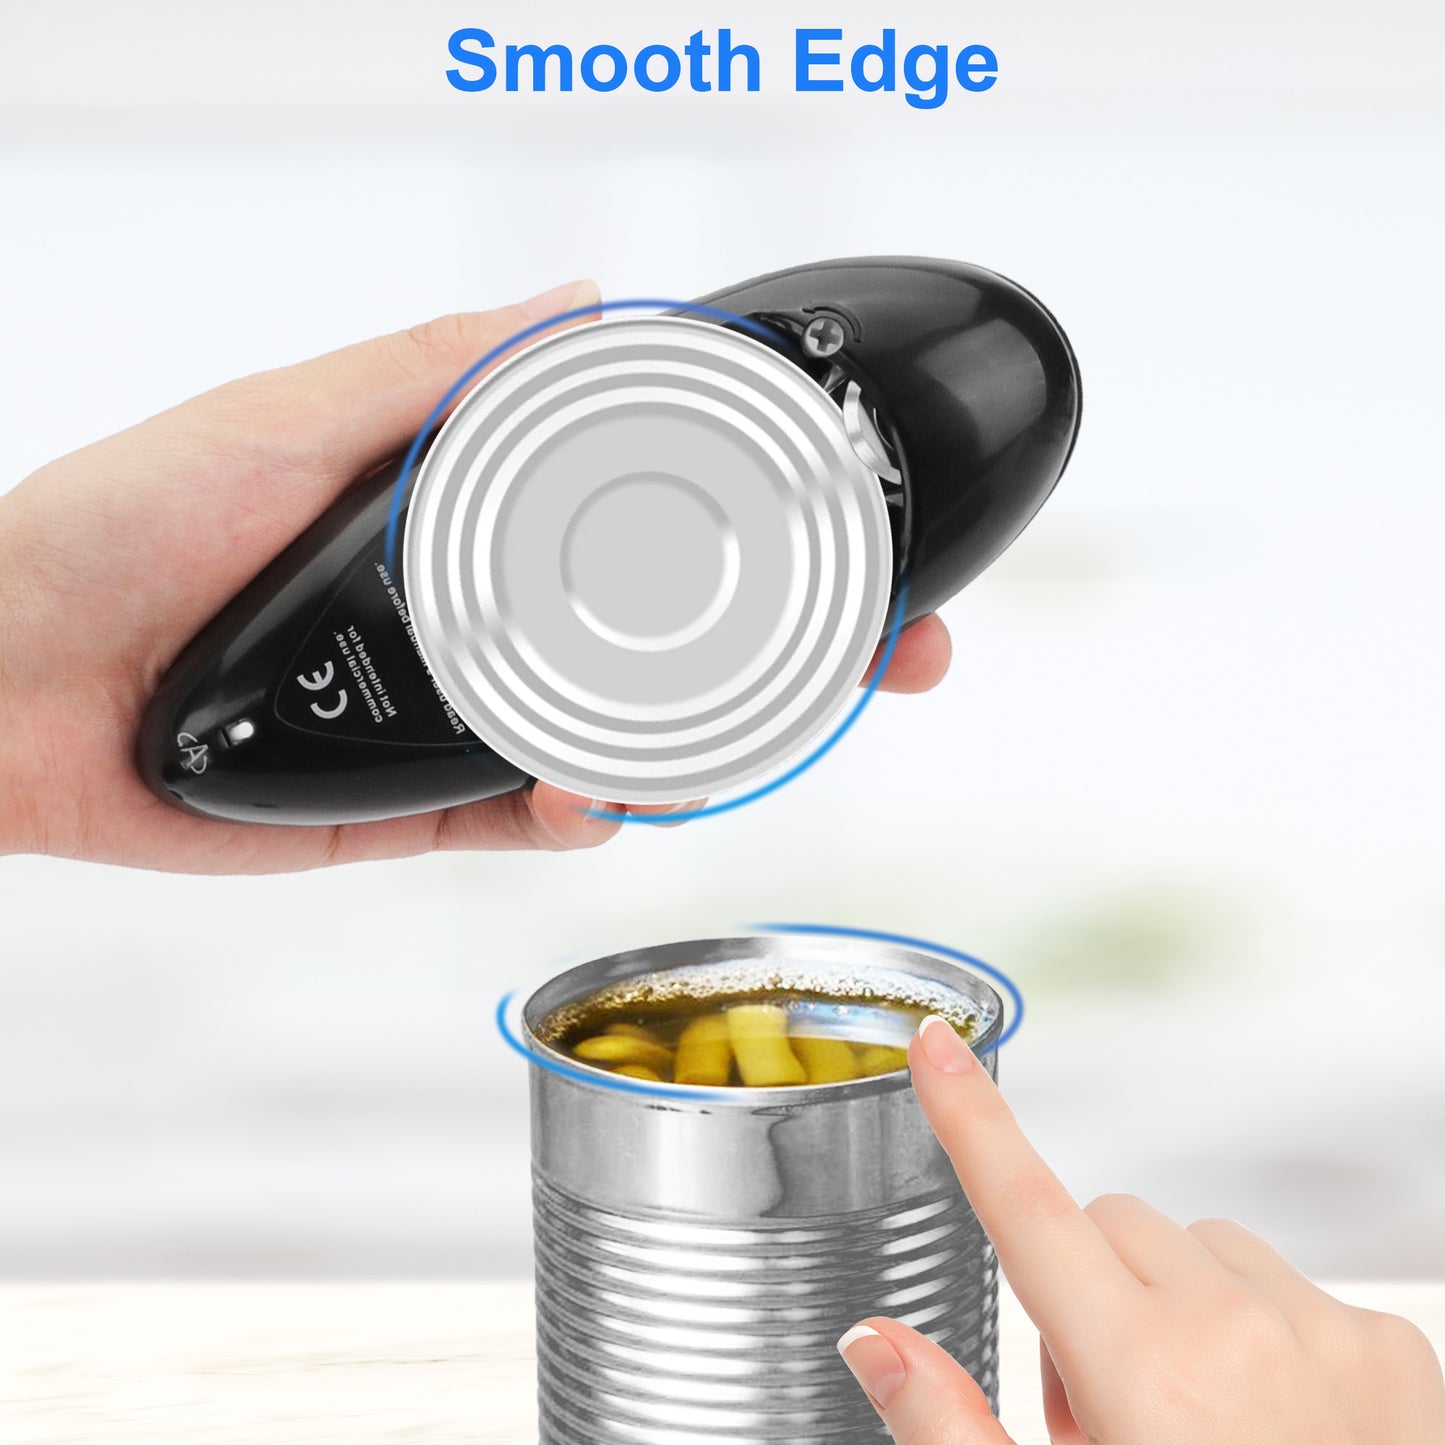 Electric Automatic Can Opener - Battery Powered Can Opener One Touch Operation with Smooth Edge For Kitchen, Camping, and a Perfect Gift for Seniors with Arthritis(Black)